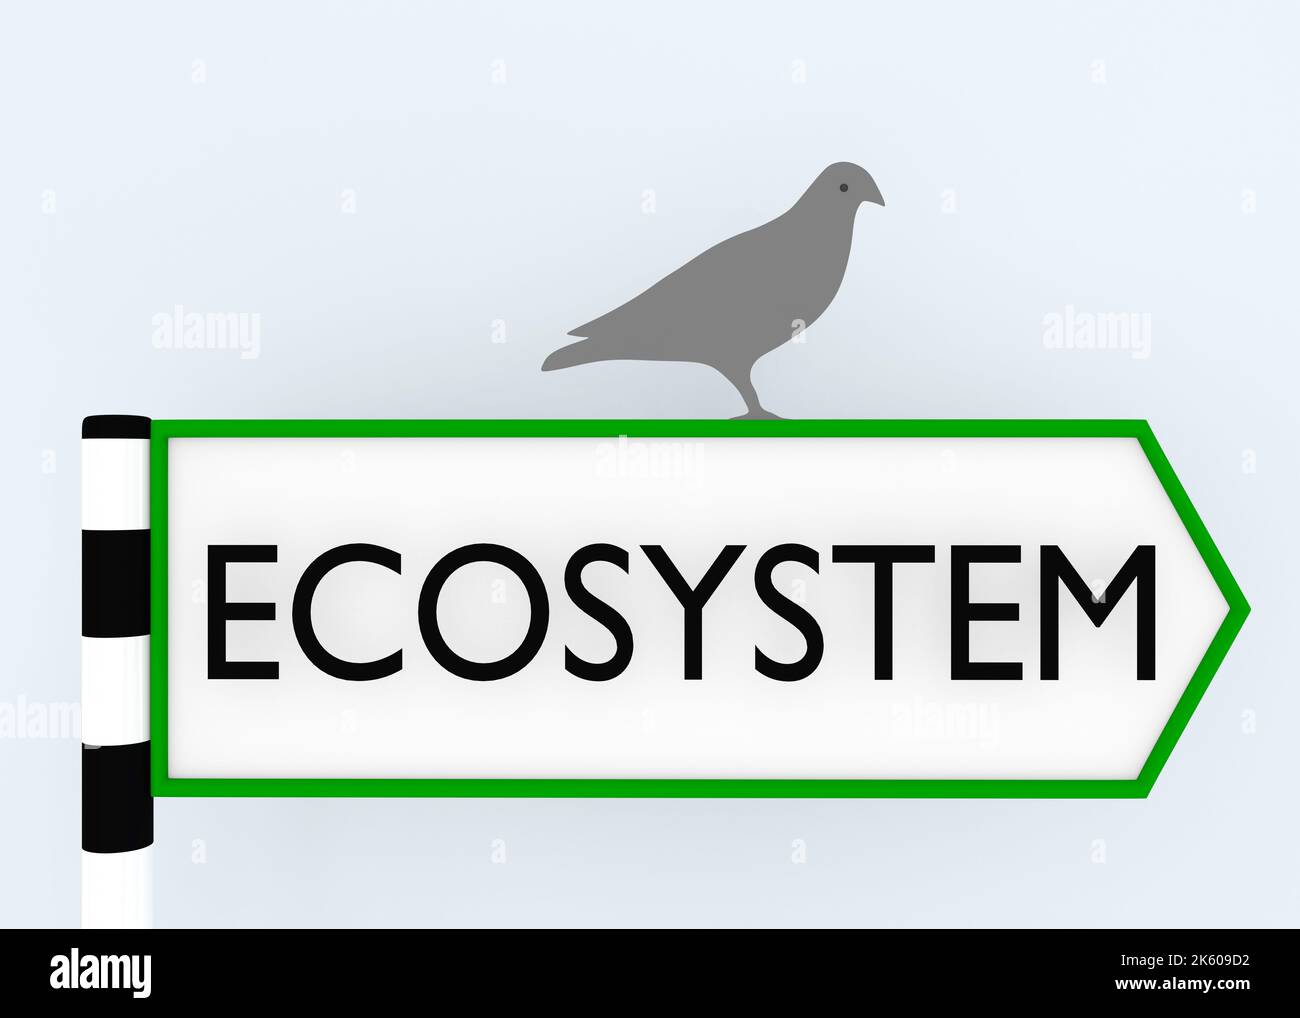 3D illustration of a bird standing on a road sign which carries the word Ecosystem Stock Photo